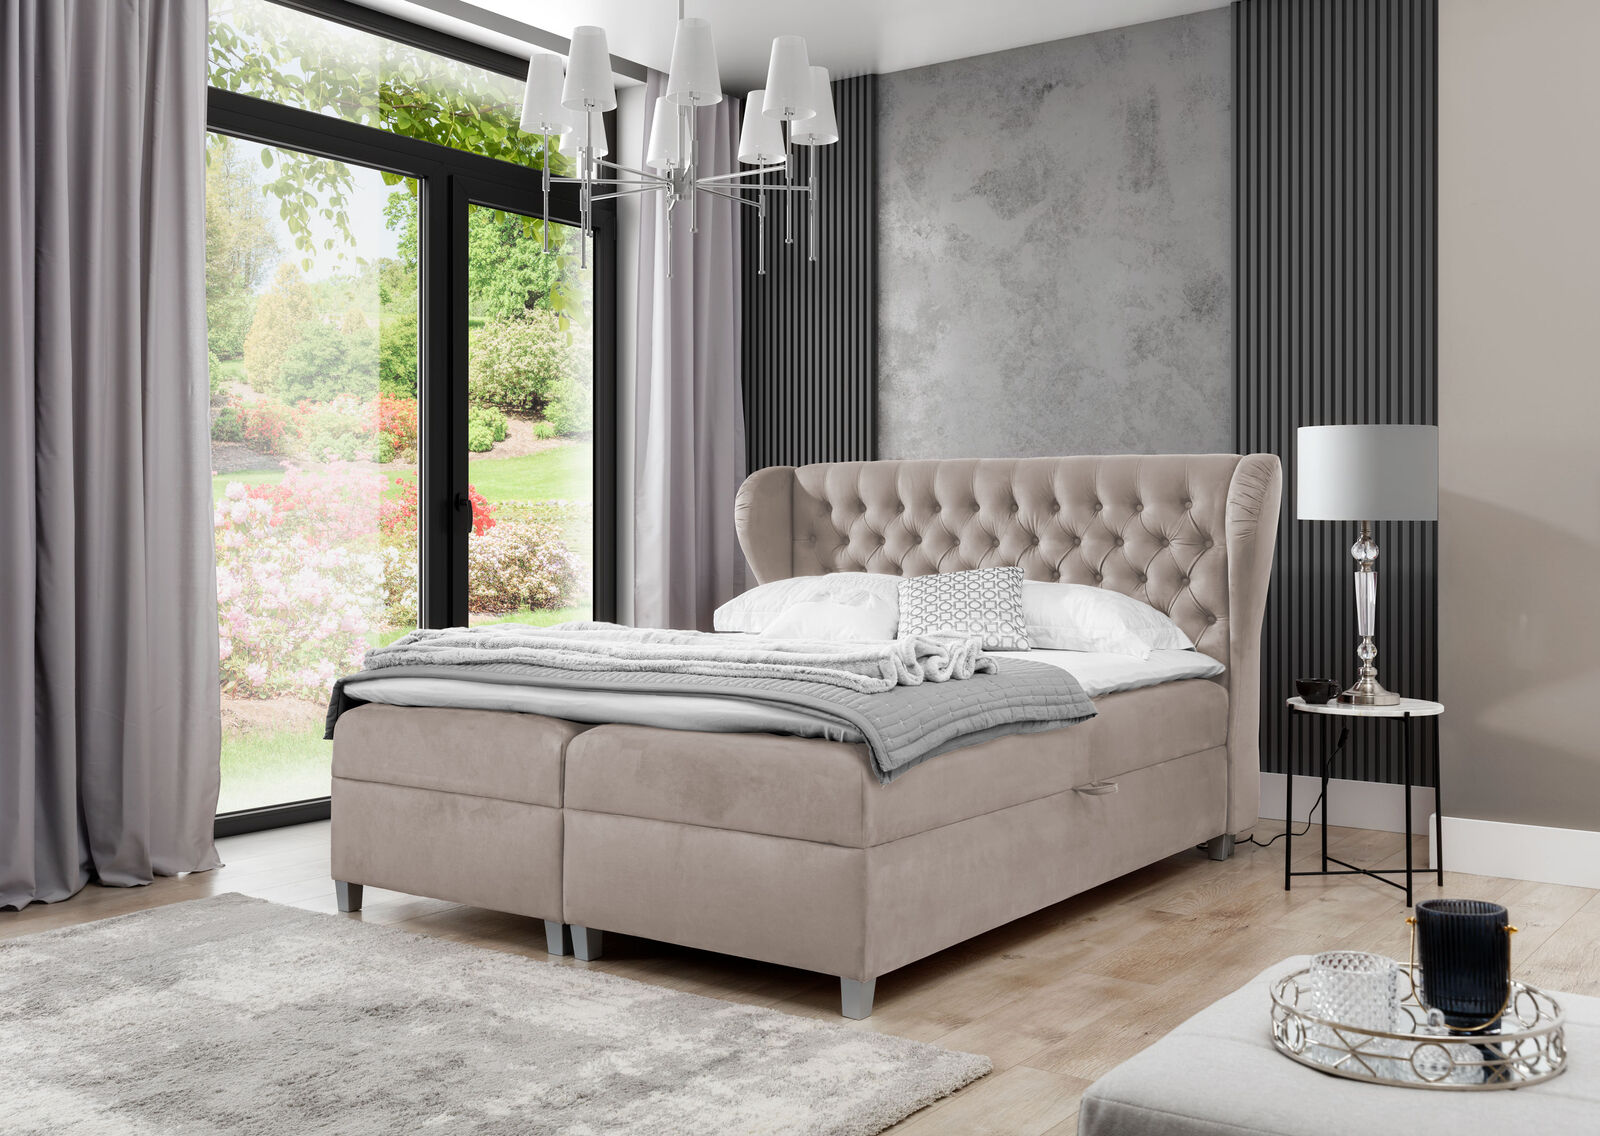 Luxury Double Bed Chesterfield Bedroom Furnishings Upholstered Bed Modern Furniture